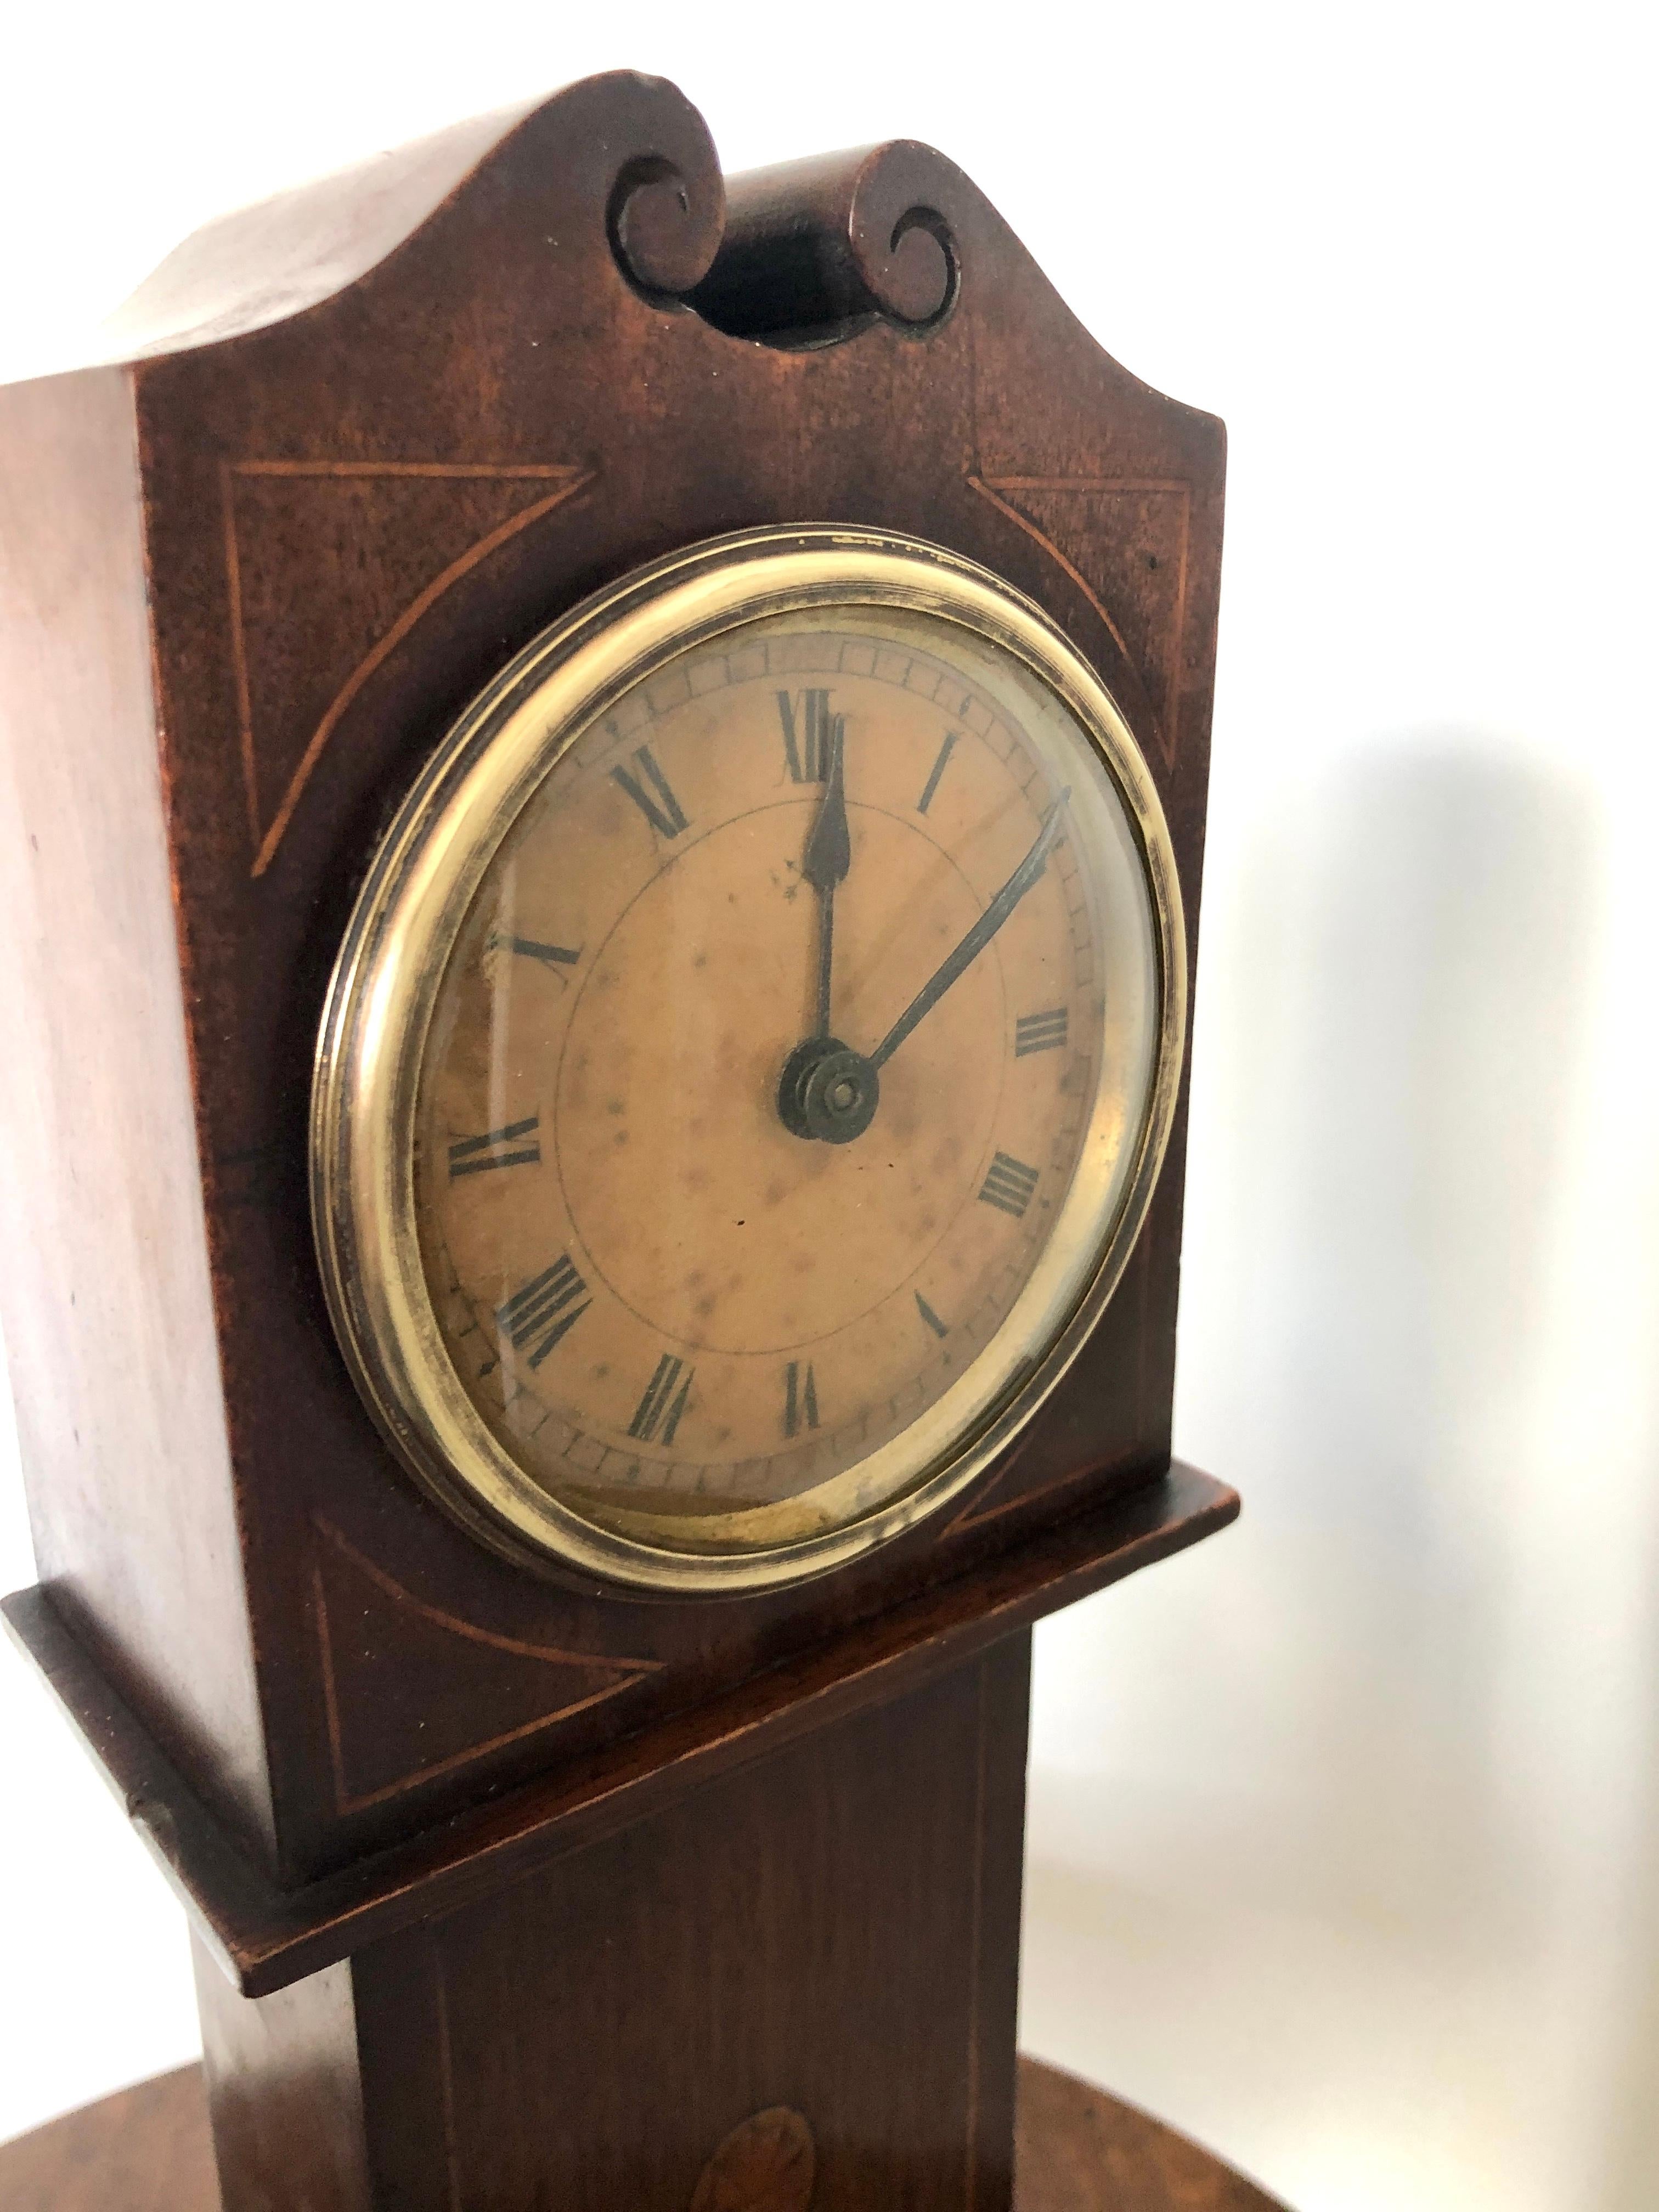 Antique inlaid mahogany apprentice miniature longcase clock having a swan neck pediment above a round dial with a brass bezel and satinwood inlay to the corners, inlaid shell to the centre of the mahogany case and standing on a plinth base.

A